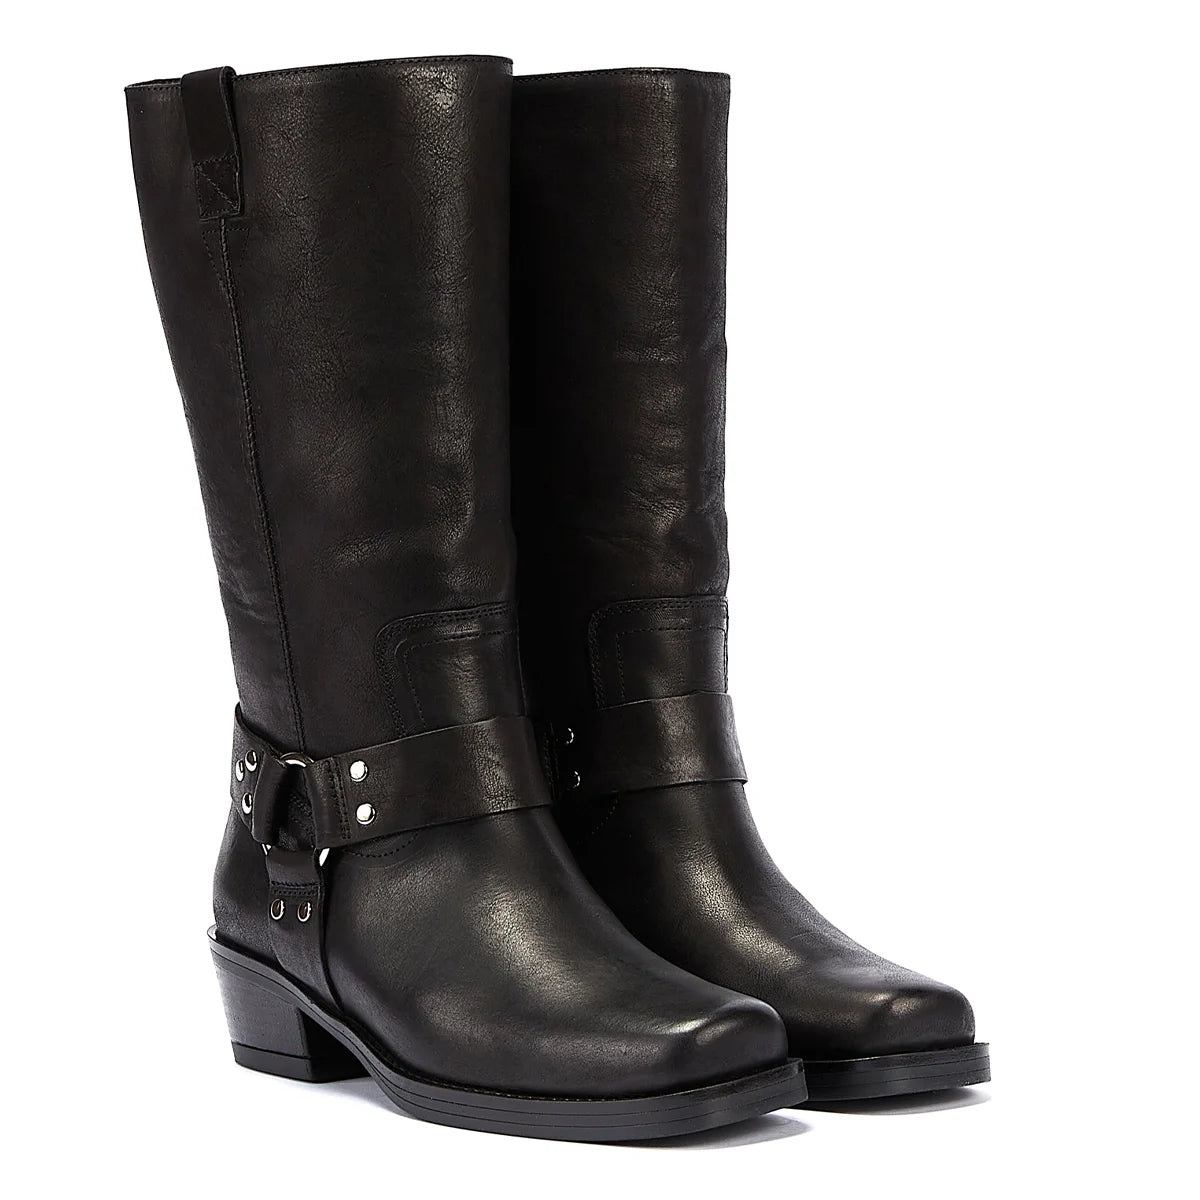 Bronx Trig-Ger Harness Leather Women’s Black Boots